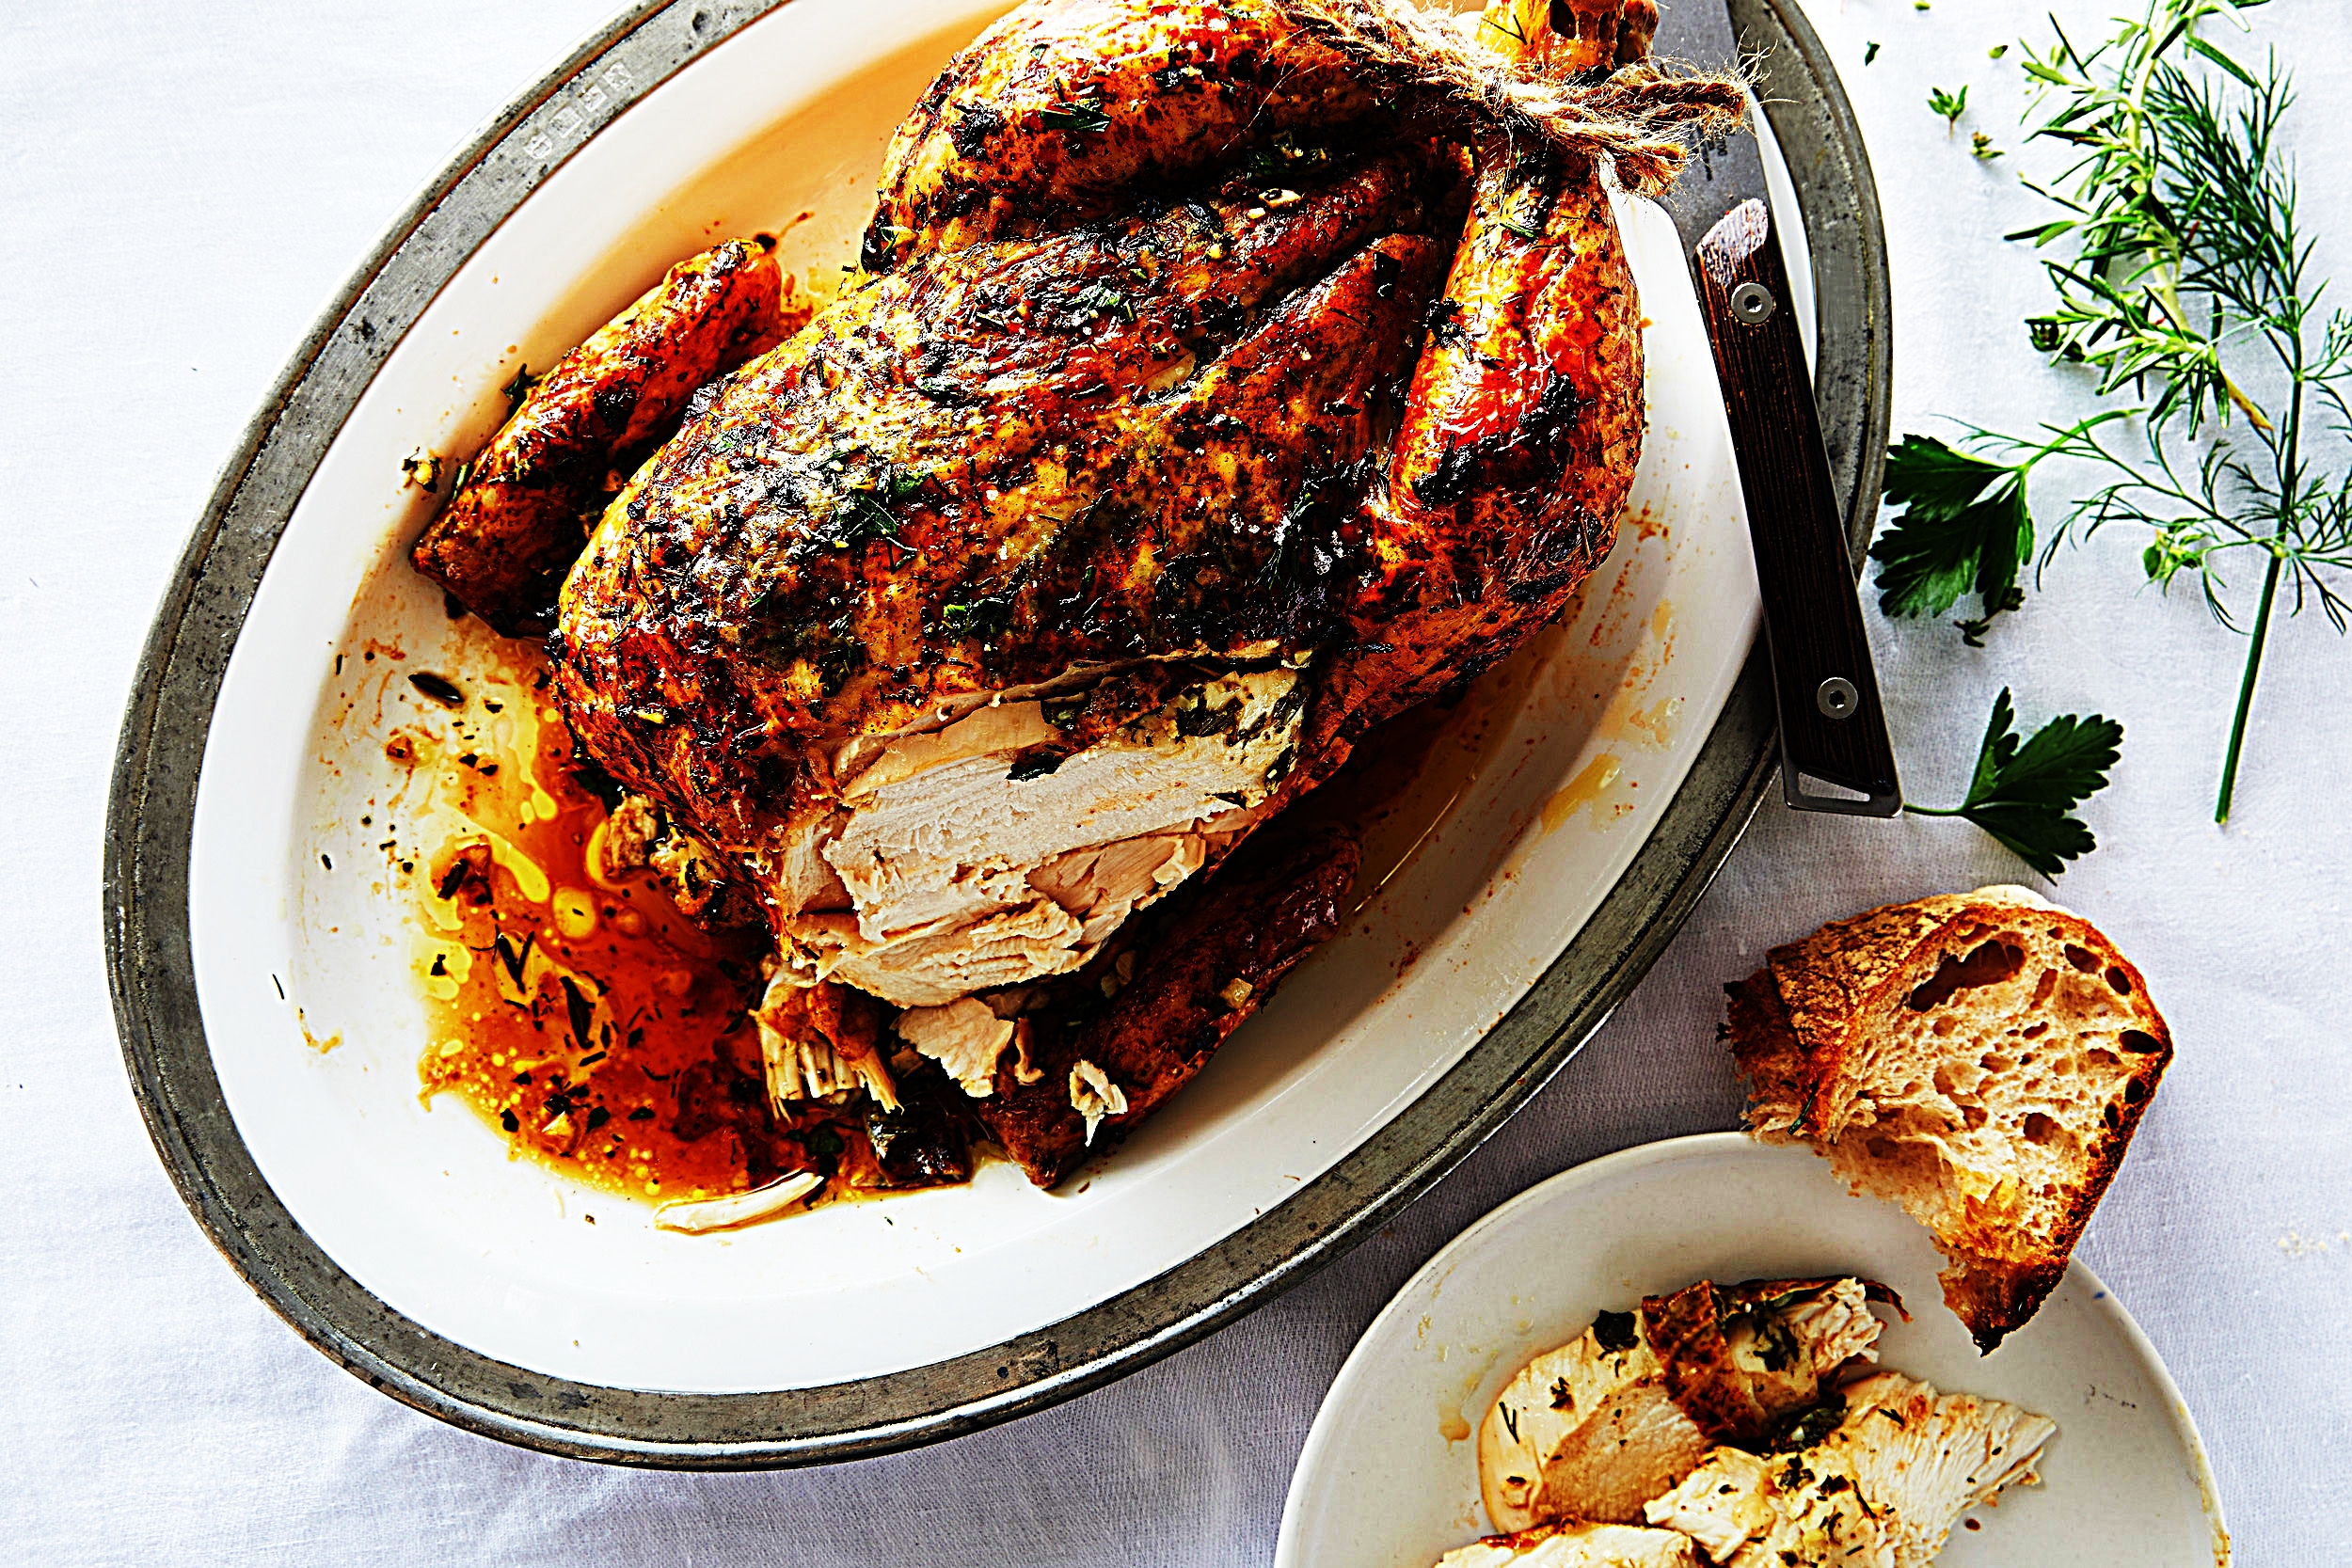 Stupid-Easy Recipe for Herb & Garlic Roasted Chicken (#1 Top-Rated)